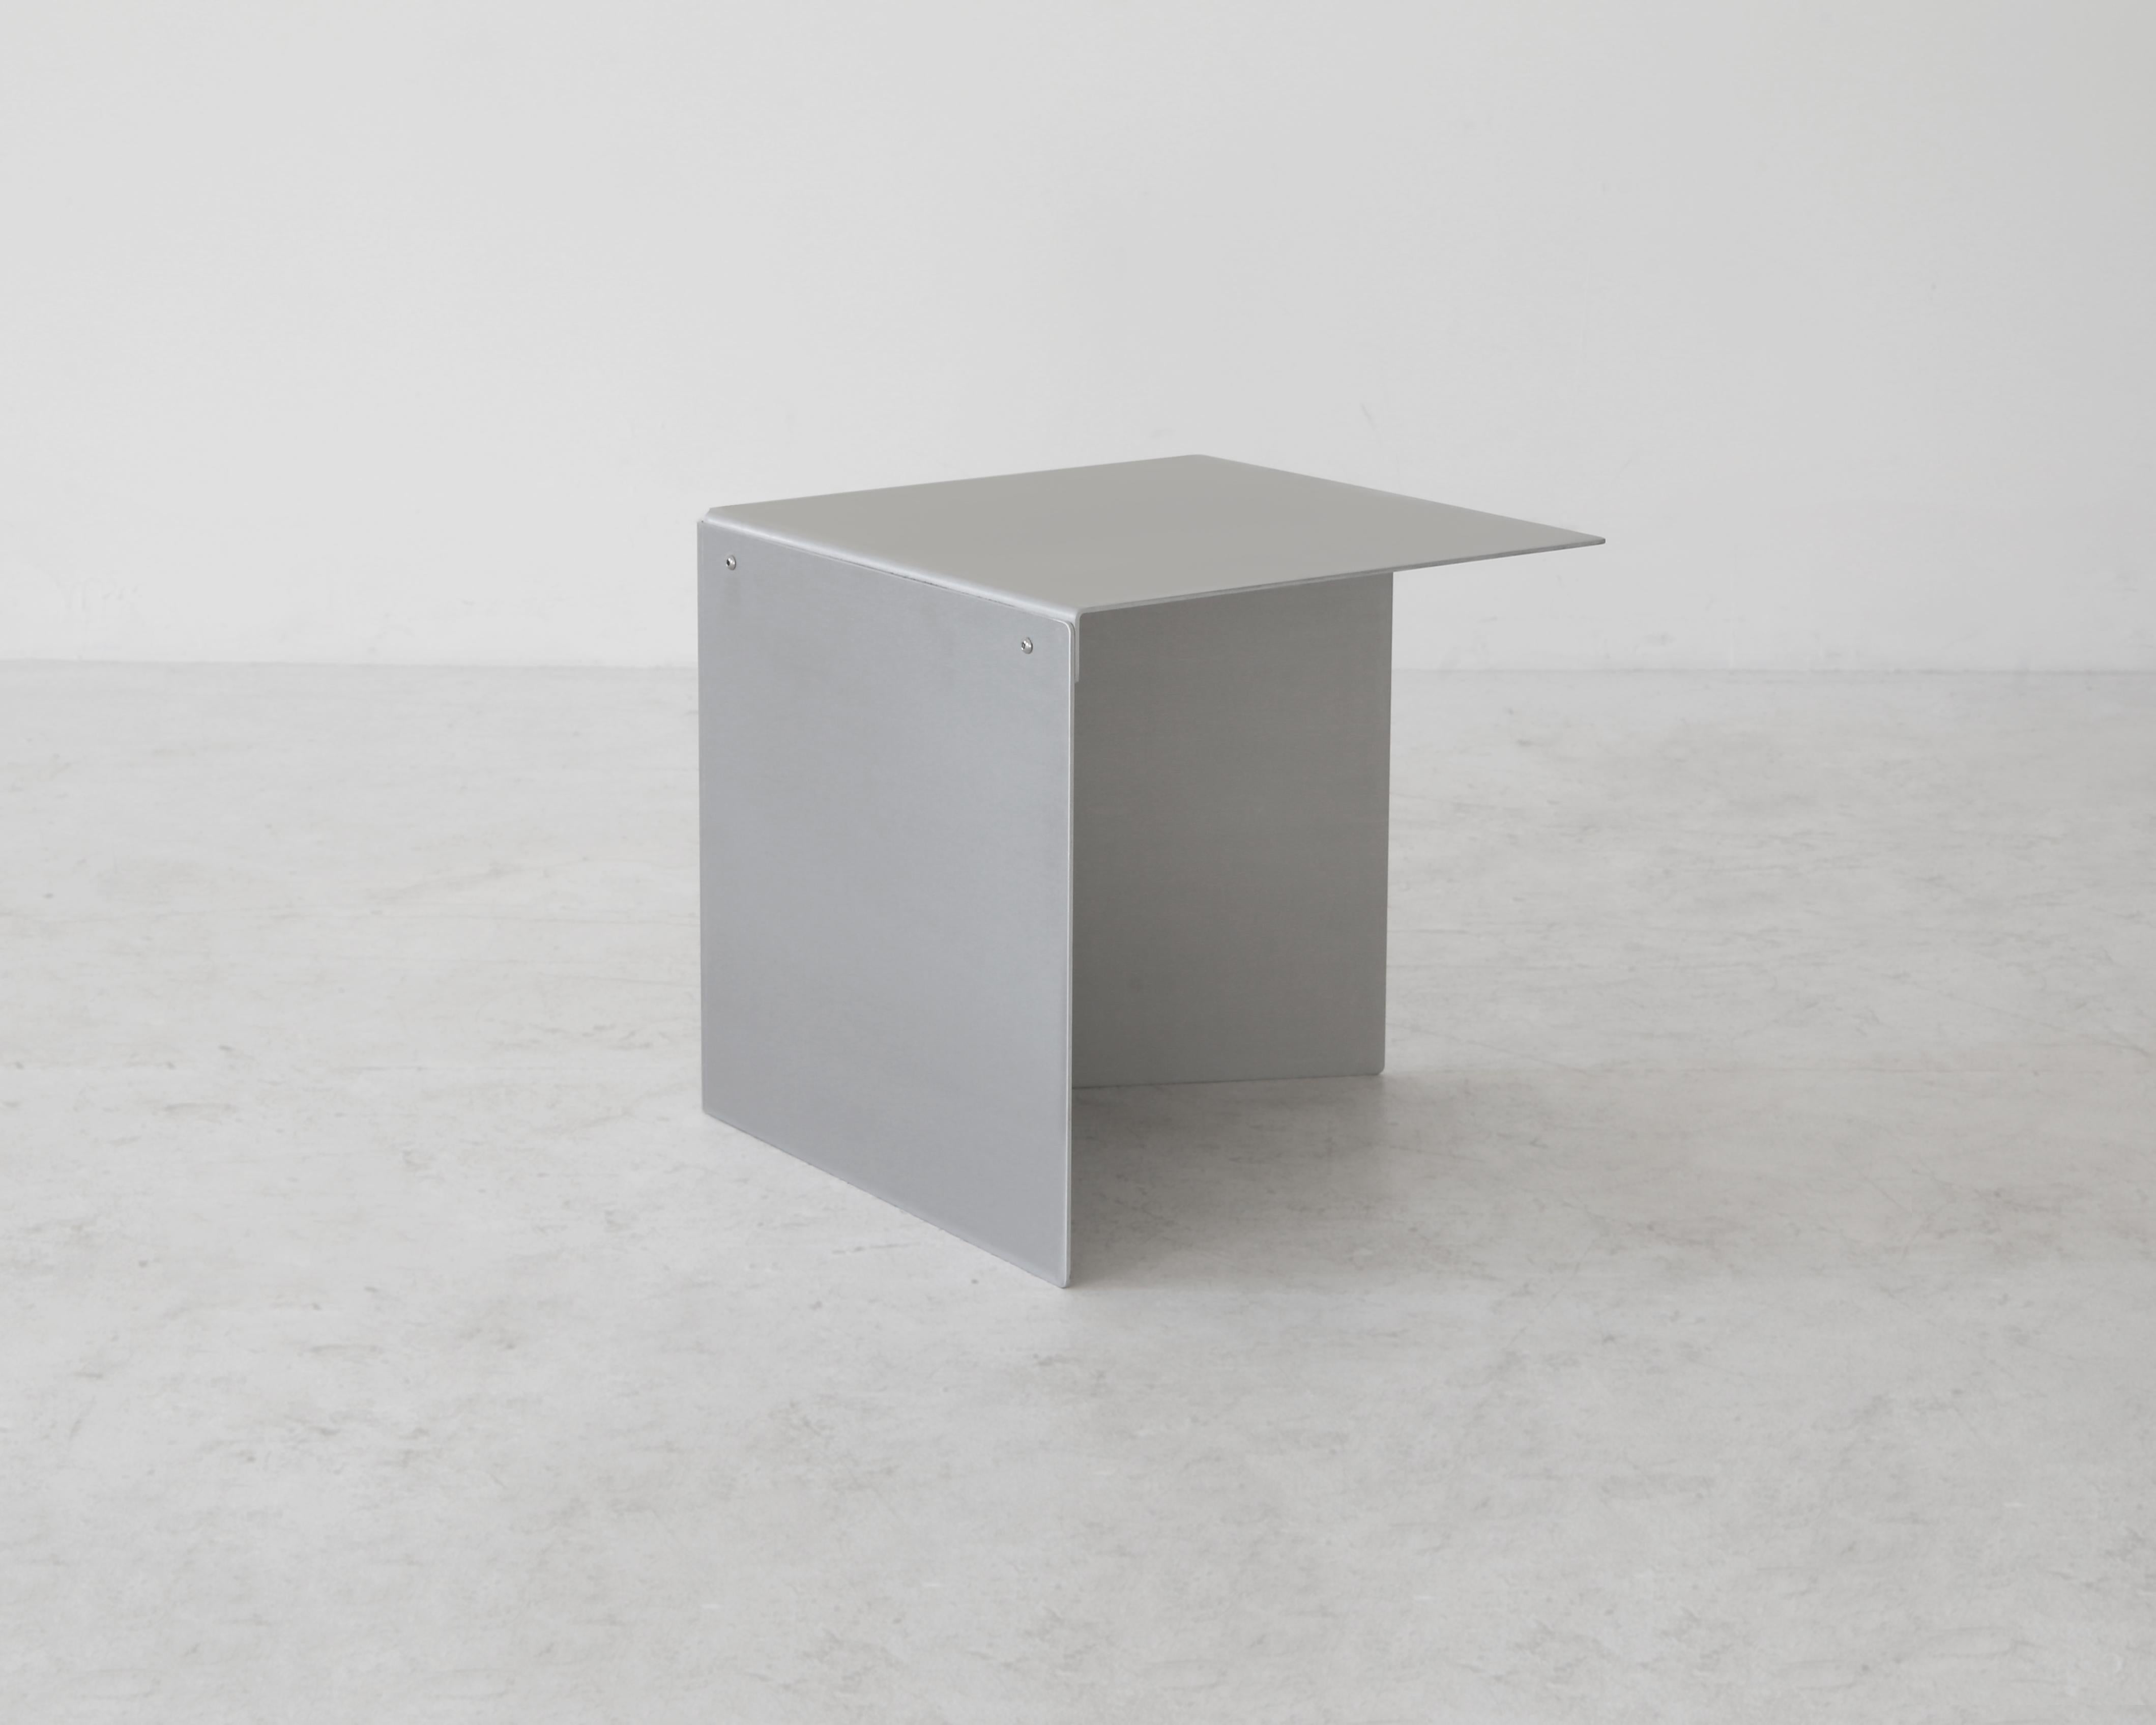 The Waverly Side Table is made of 3 pieces of bent aluminum, 1/8